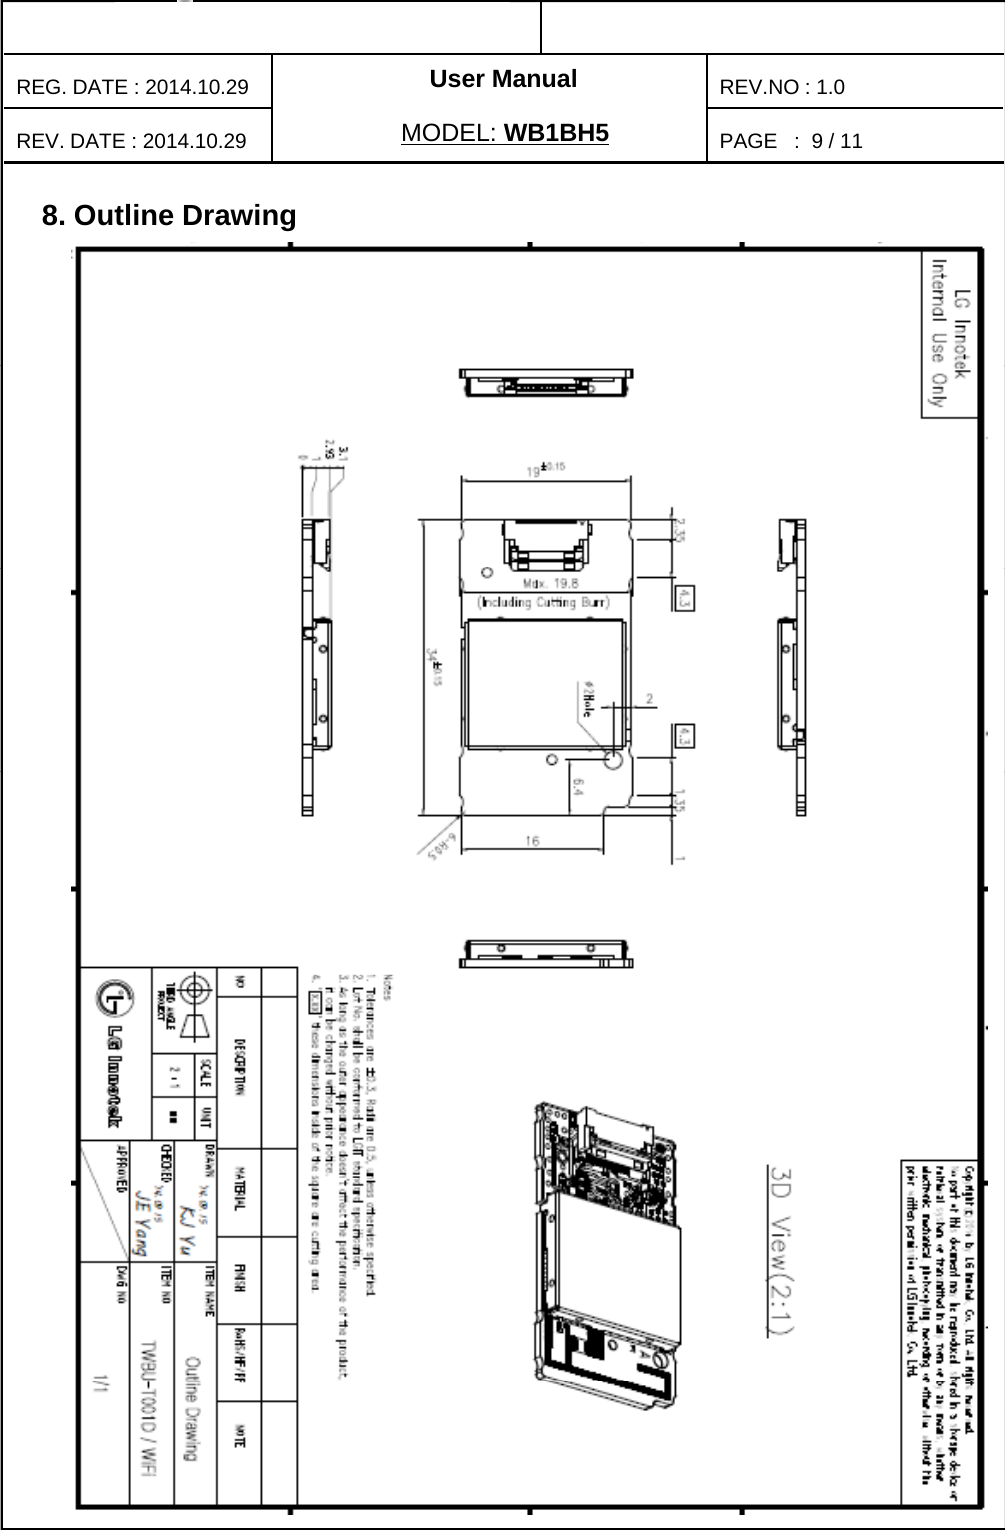 User ManualPAGE   :REG. DATE : 2014.10.29MODEL: WB1BH5REV. DATE : 2014.10.29REV.NO : 1.09/ 118. Outline Drawing©2014 LGIT. All rights reserved.